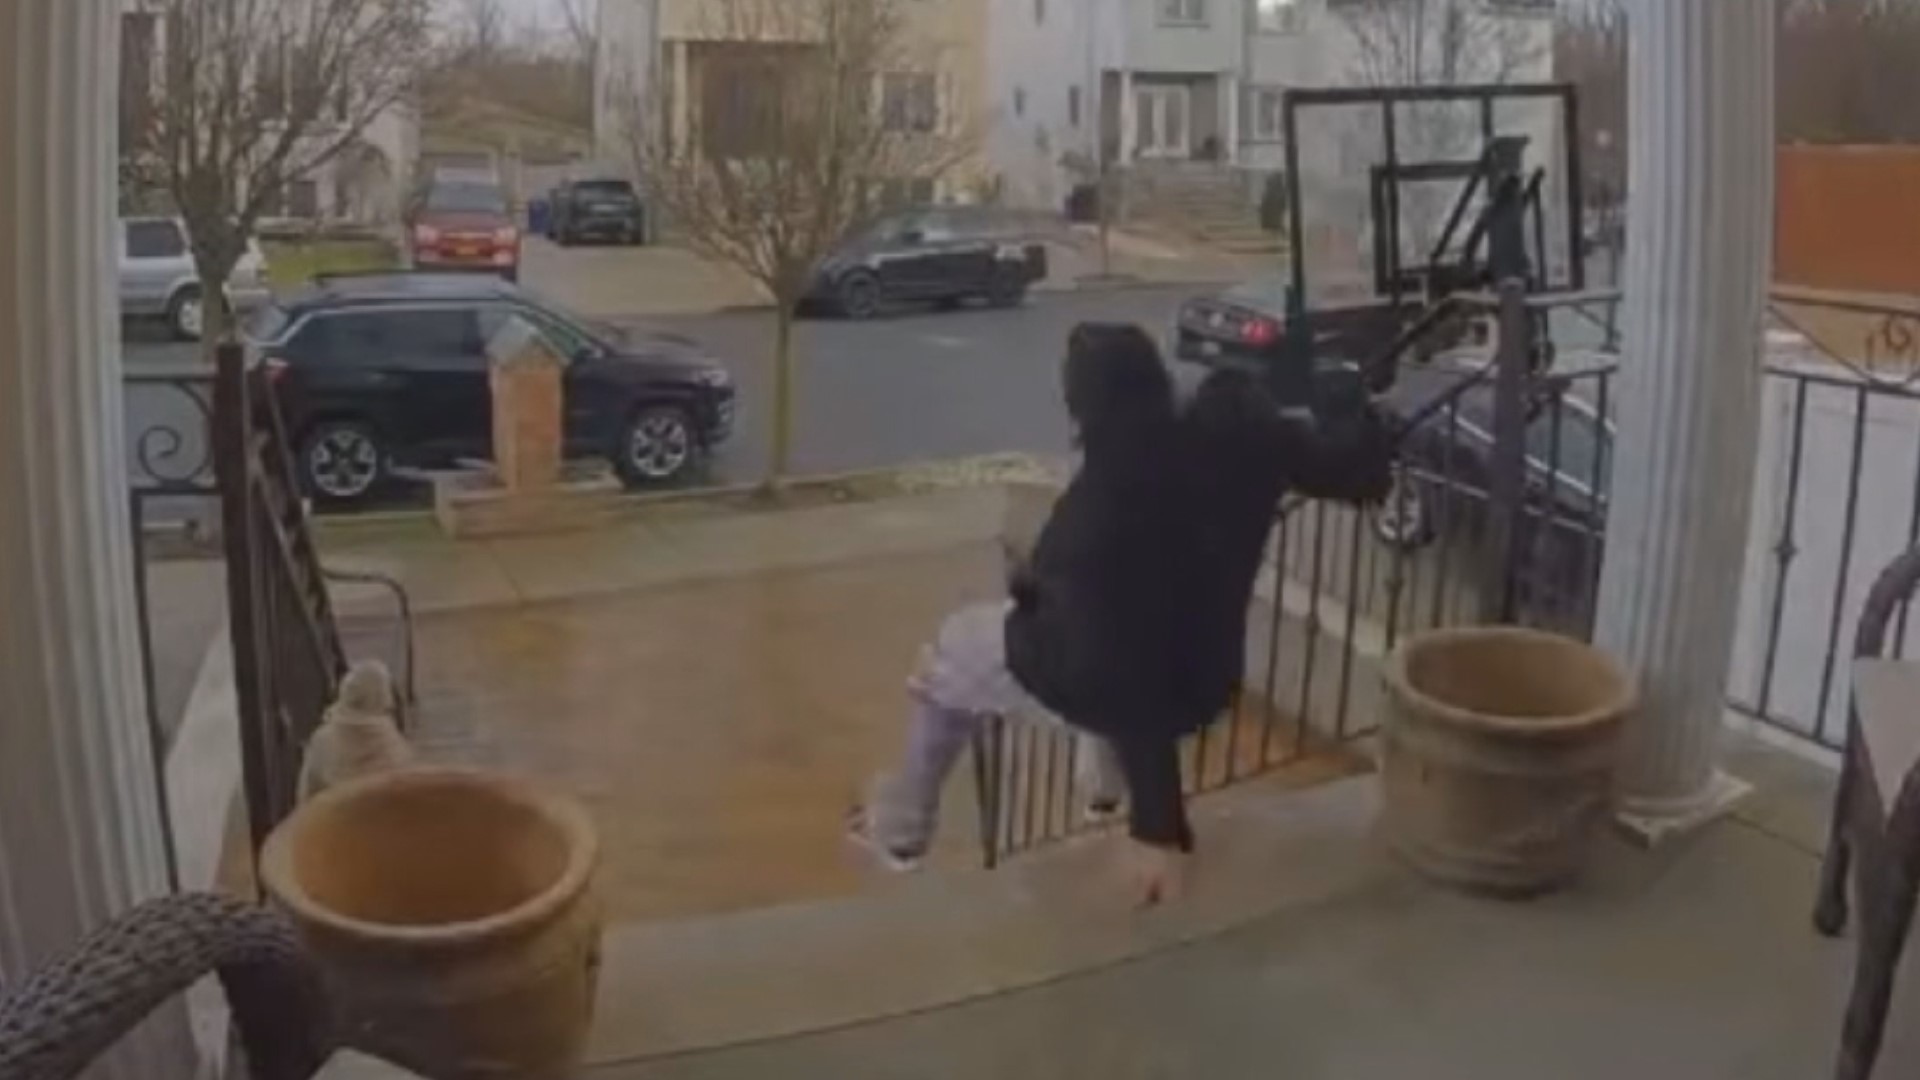 Home security cameras have been capturing some pretty hilarious moments lately, and some viewers shared those moments with Newswatch 16's Ryan Leckey.